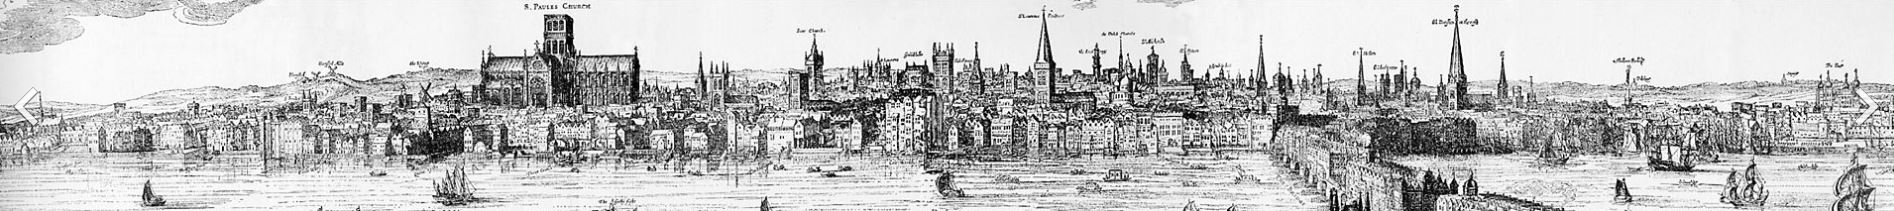 Panorama of the City of London in 1616 by Claes Visscher